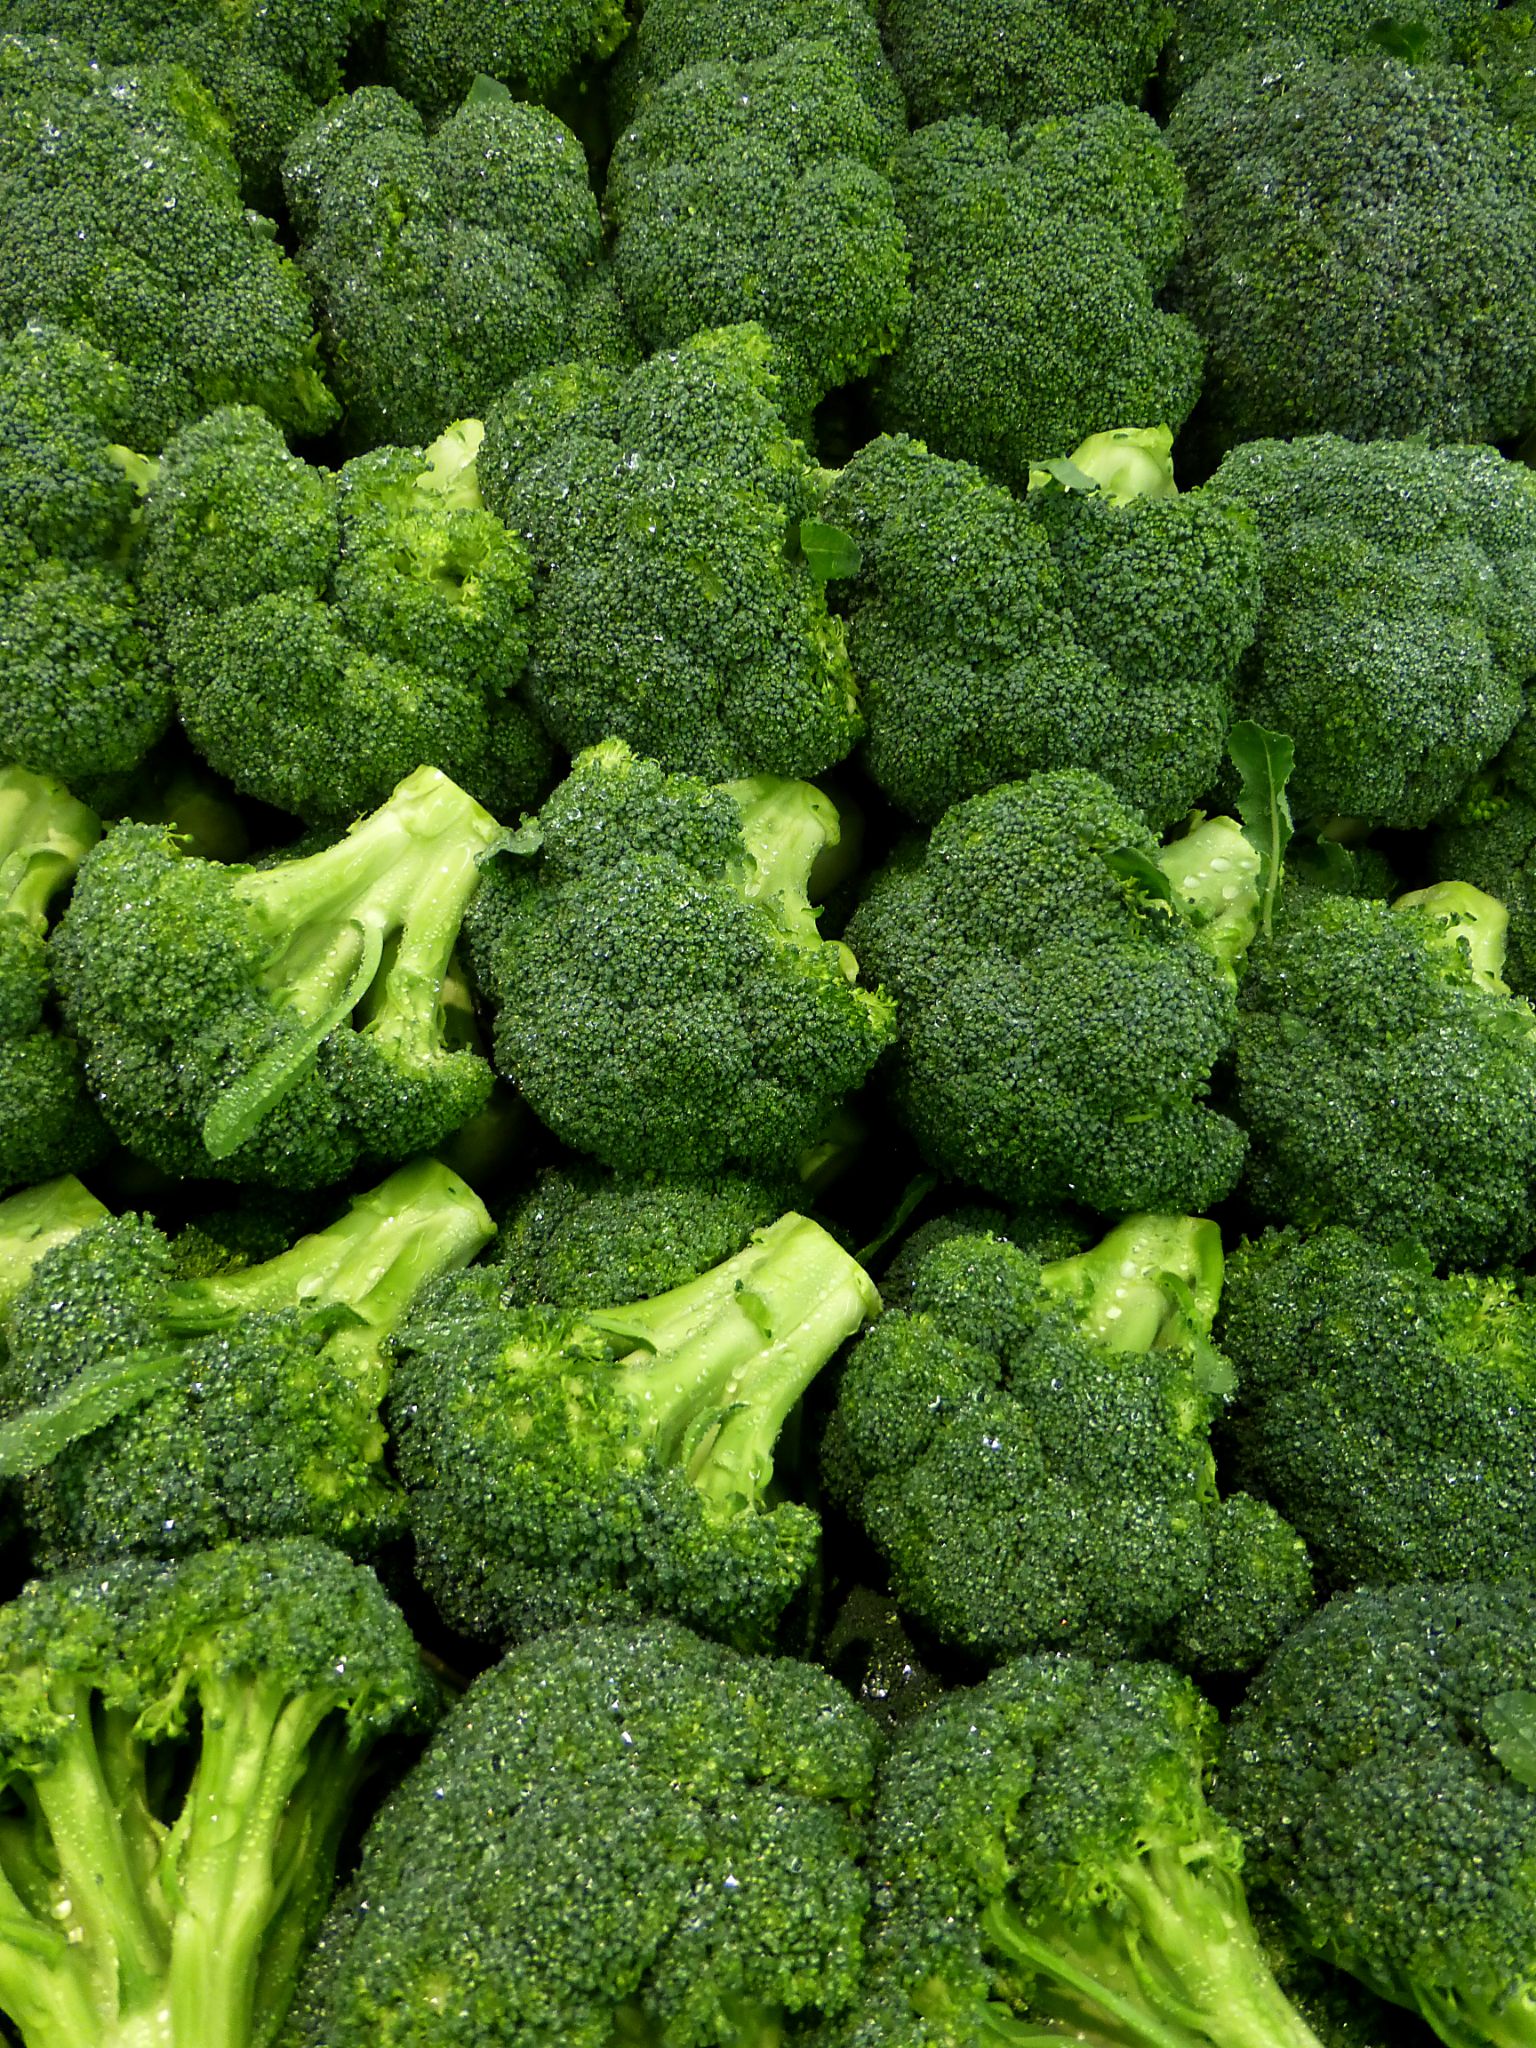 Get To Know All Types Of Broccoli In Some Minutes